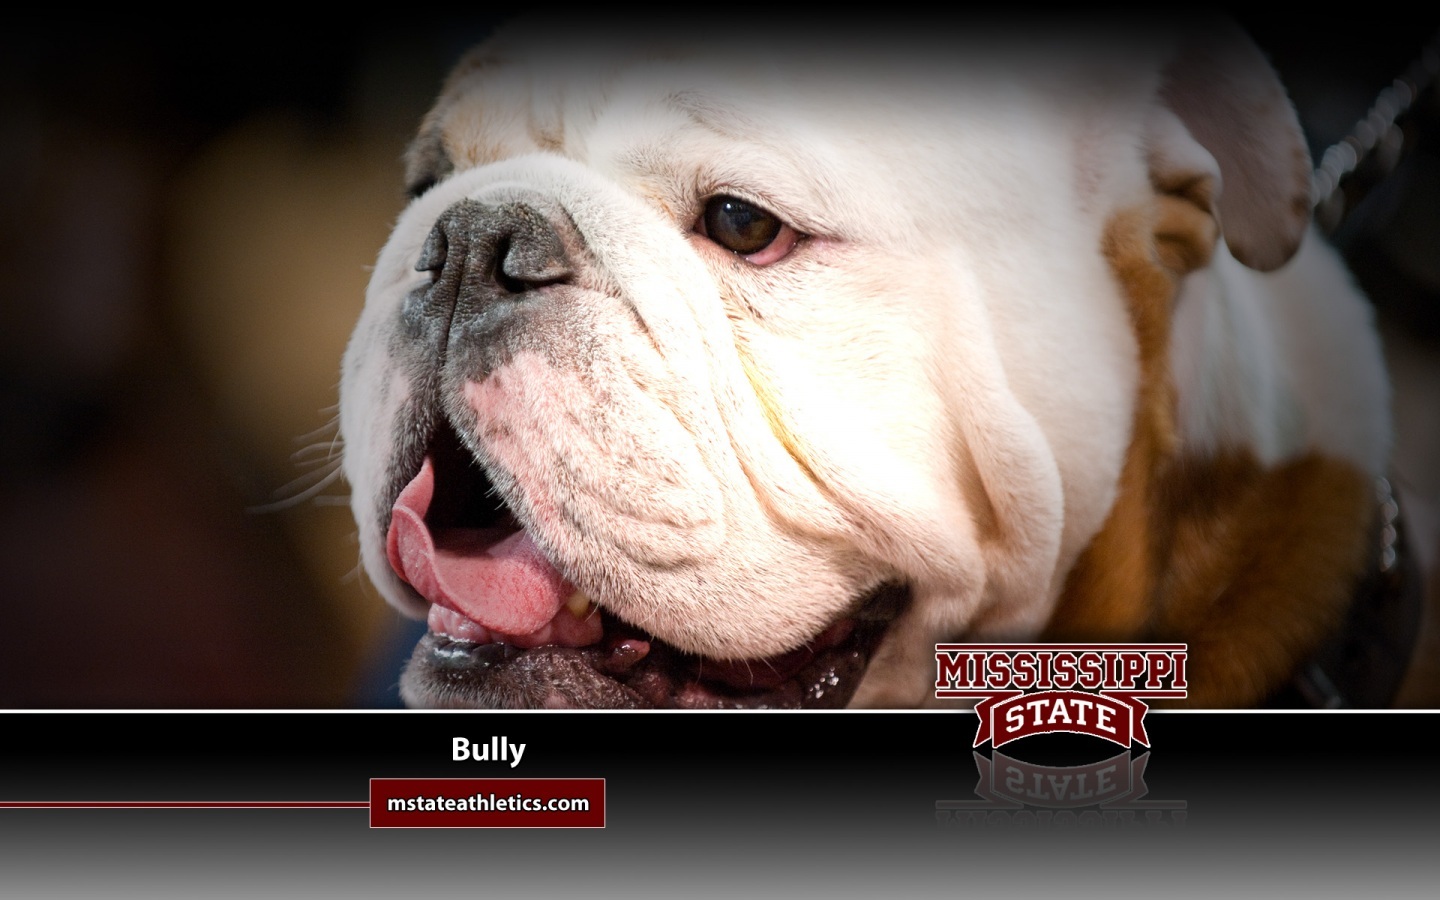 Mississippi State University Bulldog Wallpaper Photo Shared By Erny